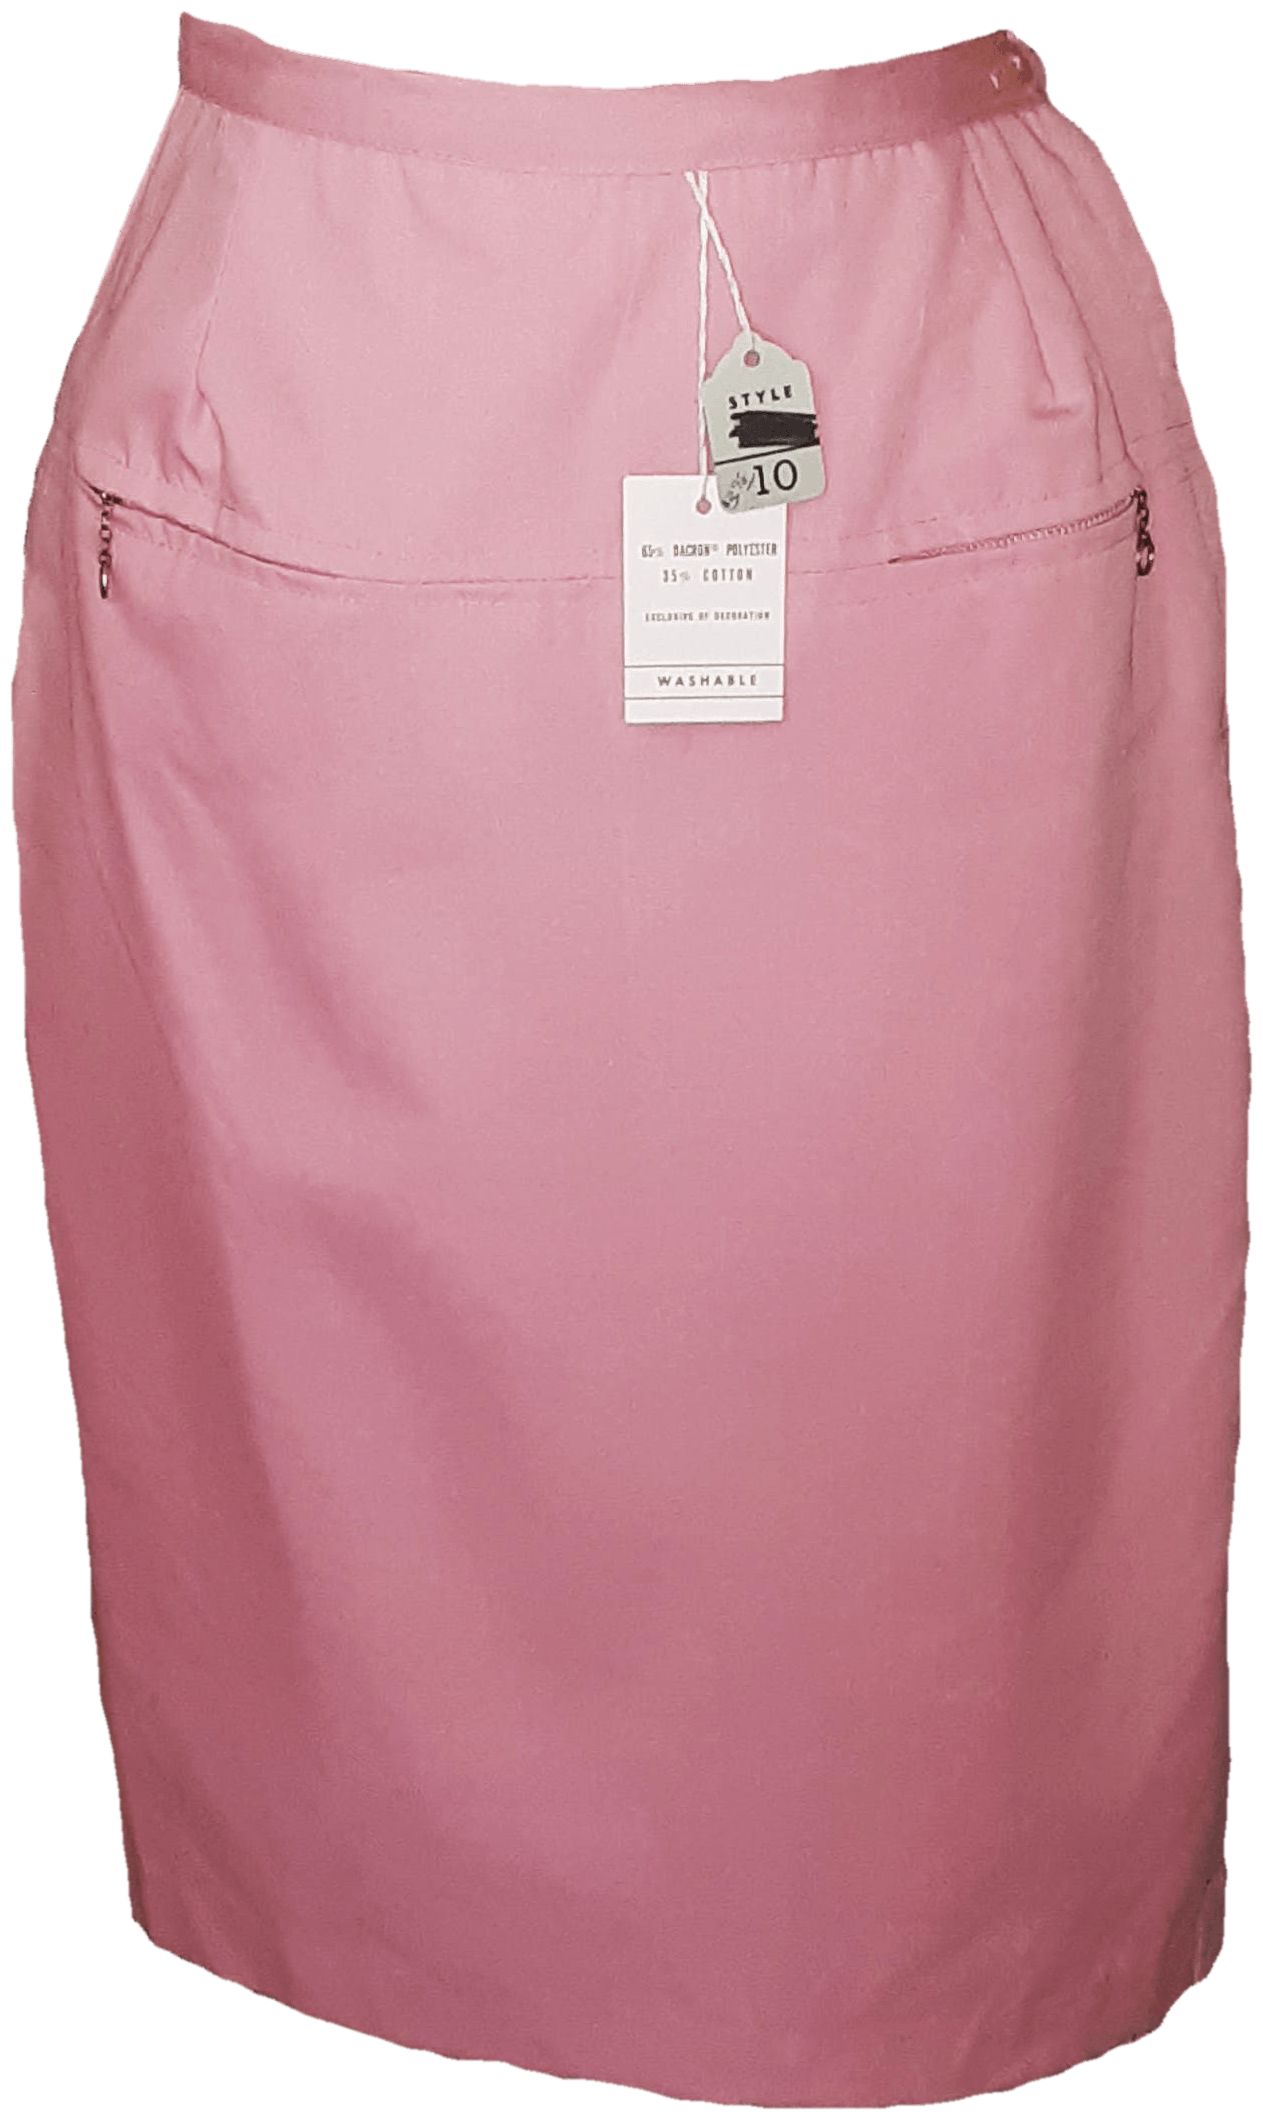 Vintage 60's Deadstock Soft Pink Pencil Skirt with Zipper Pockets ...